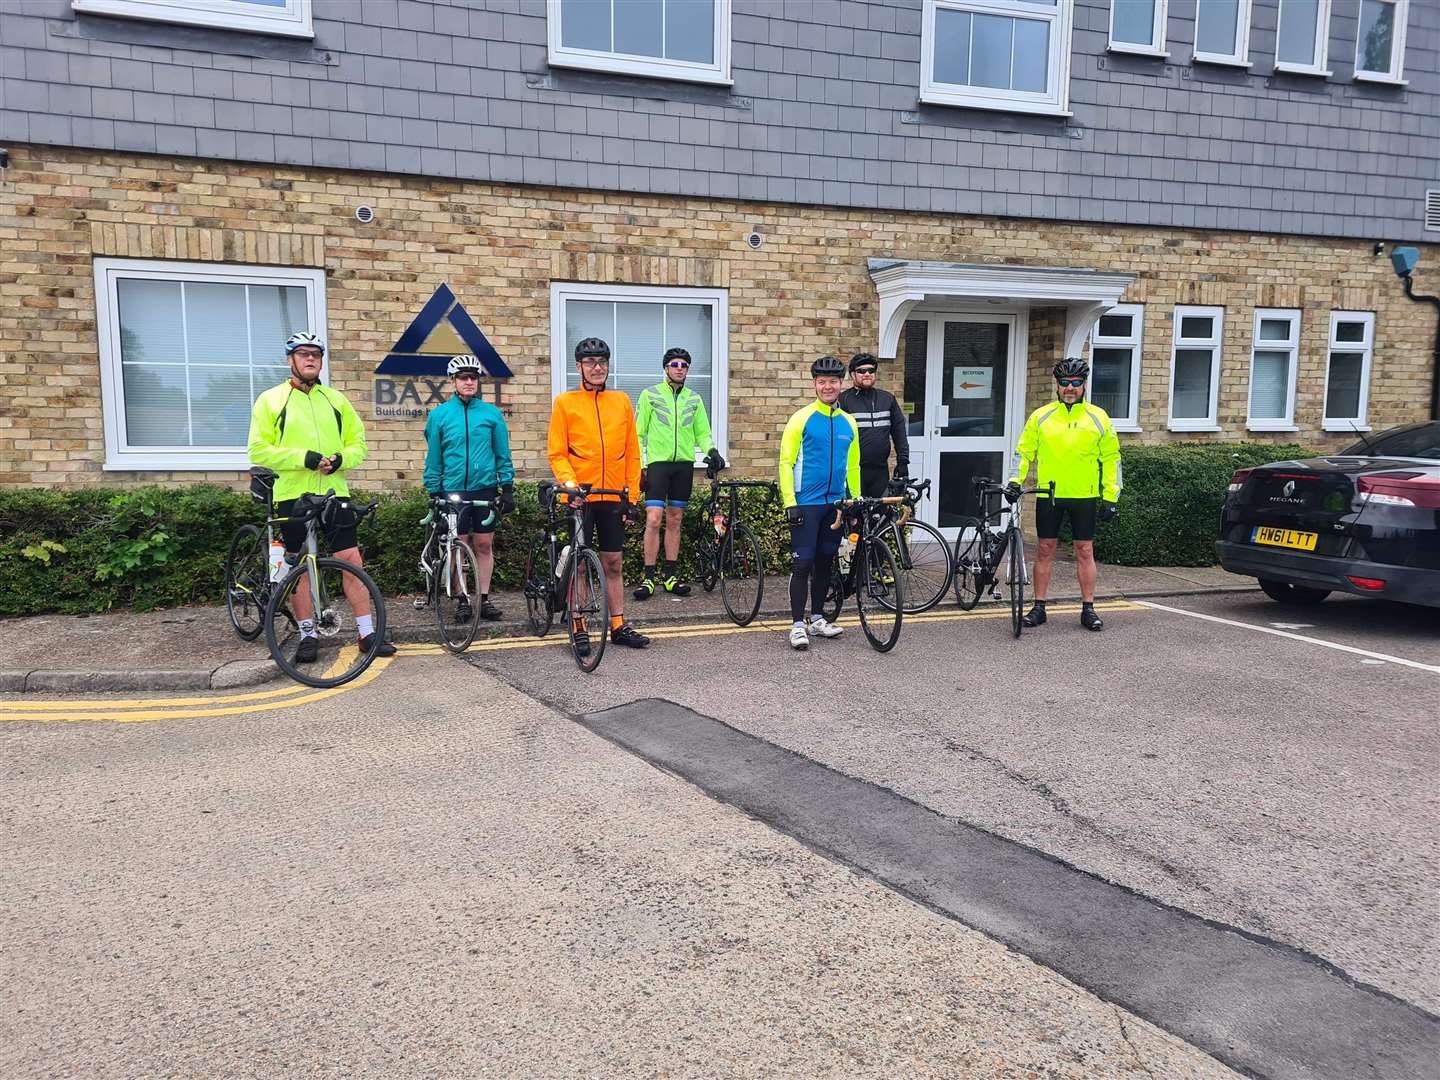 Paddock Wood-based Baxall Construction has pledged to support the ellenor bike cycle challenge for a second year. Picture: ellenor